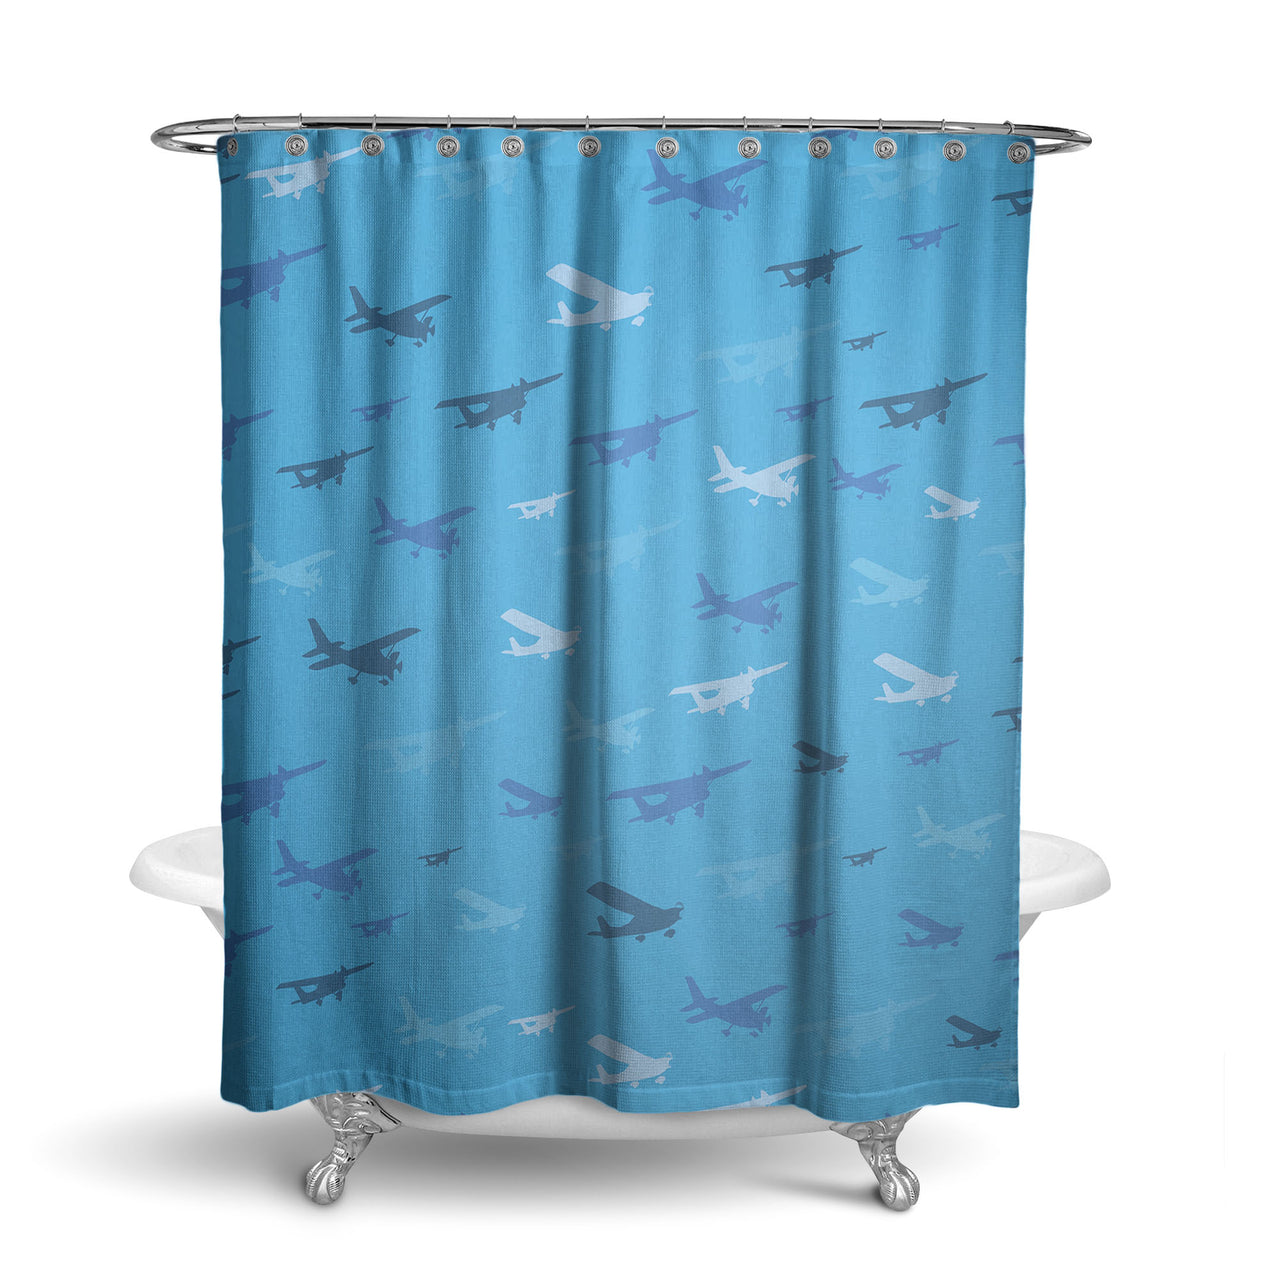 Many Propellers Designed Shower Curtains